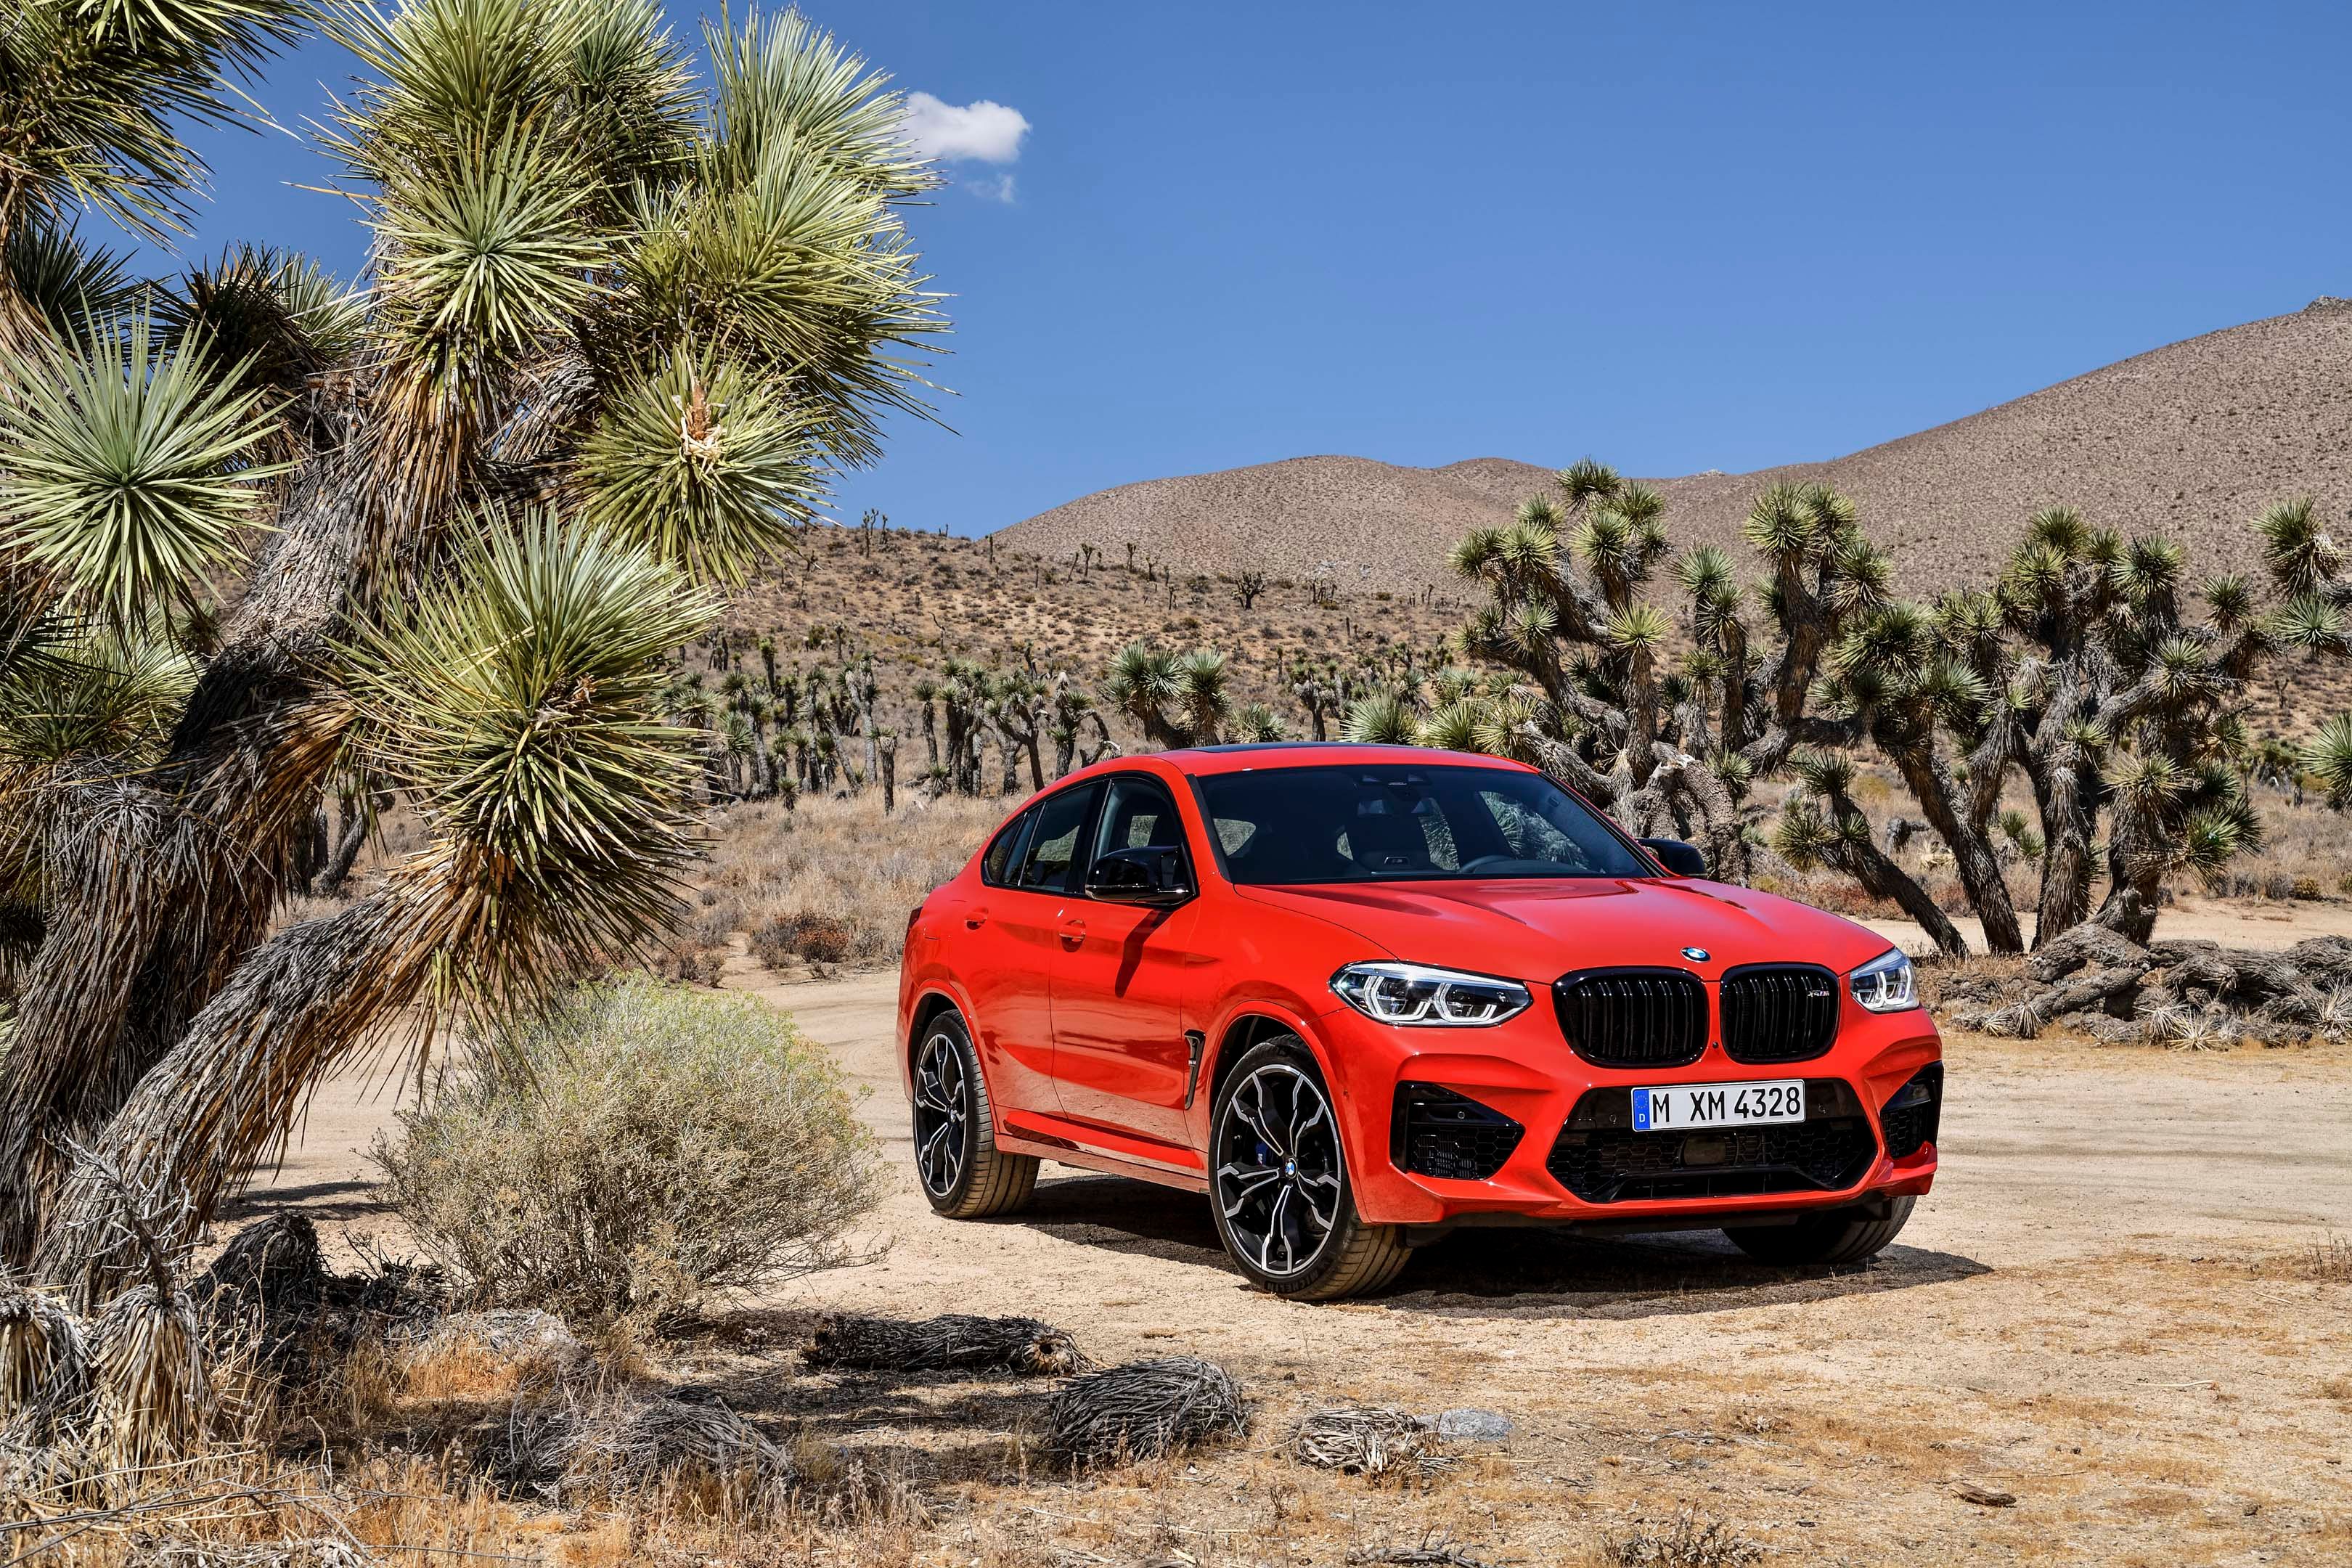 2020 Wallpaper of the Day: 2020 BMW X4M